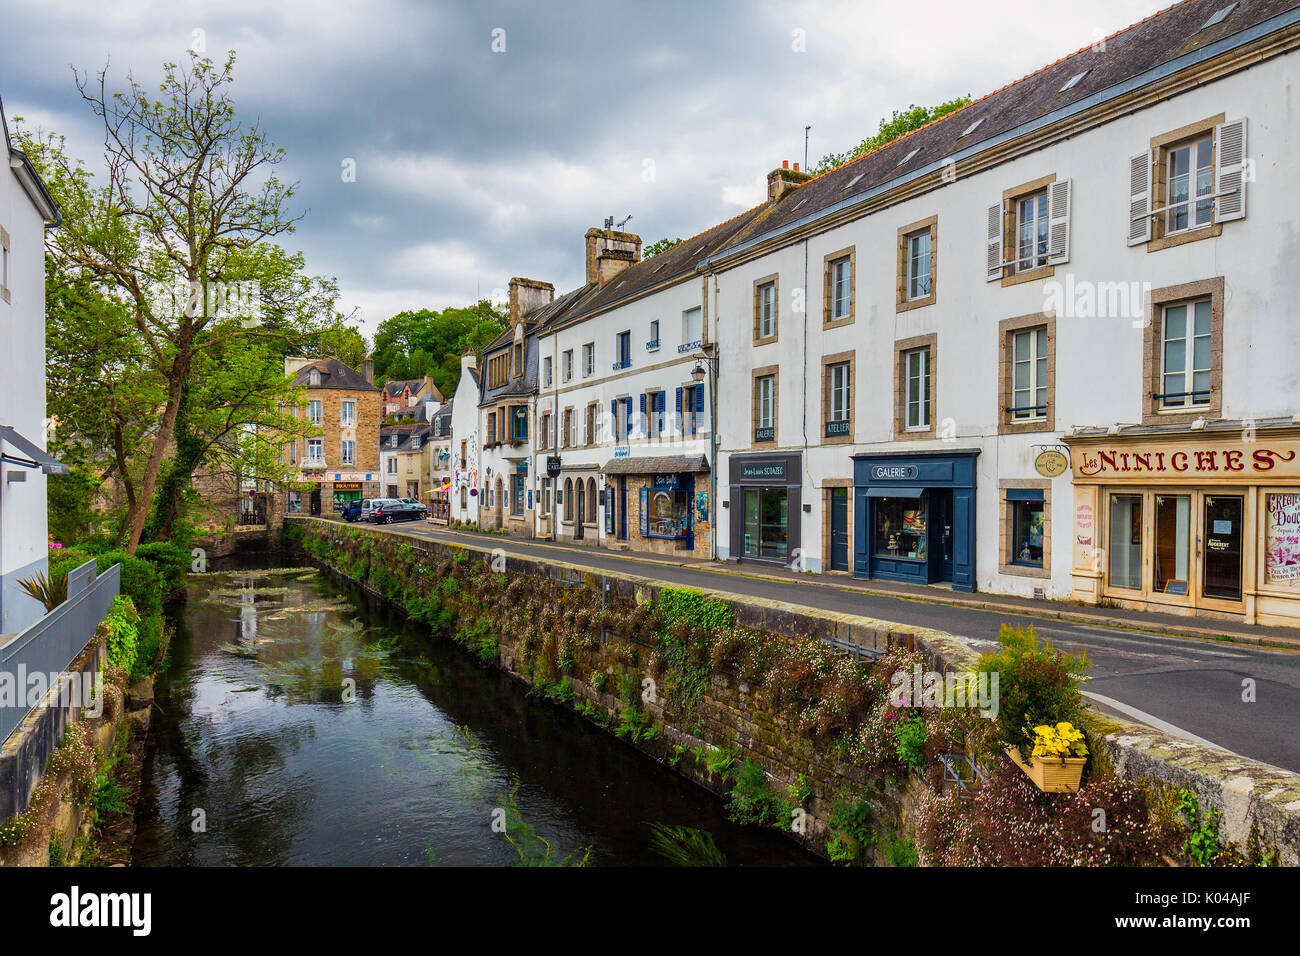 Pont-Aven, France - April 28, 2017: Idyllic scenery at Pont-Aven, street view with small shops, commune in the Finistere department of Brittany (Breta Stock Photo